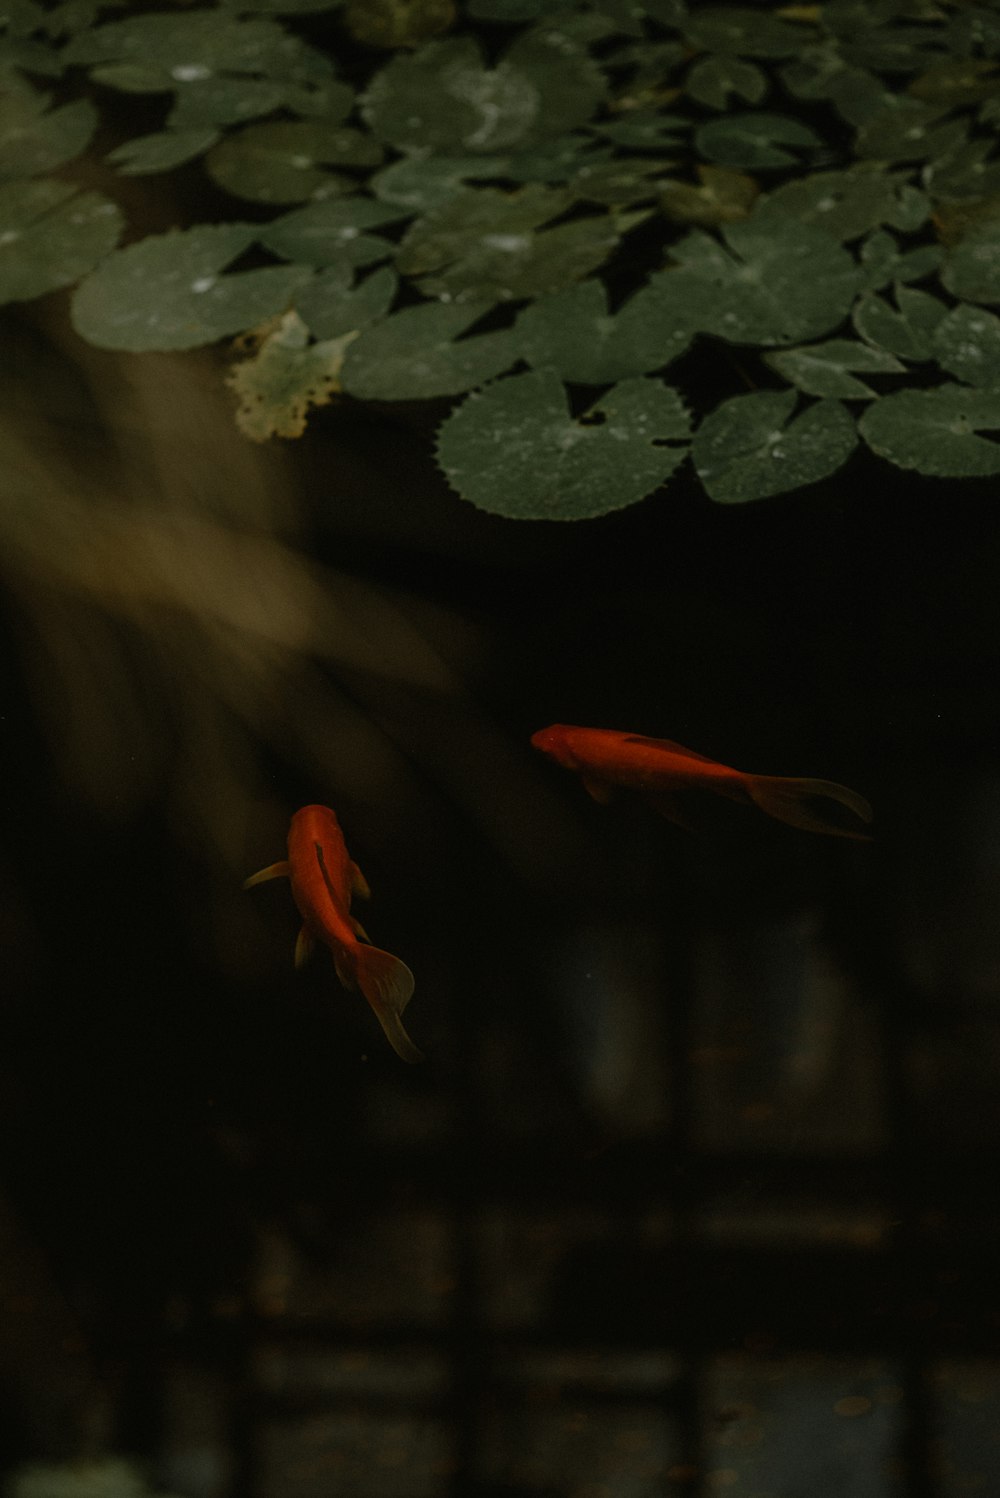 two goldfish swimming in a pond with lily pads